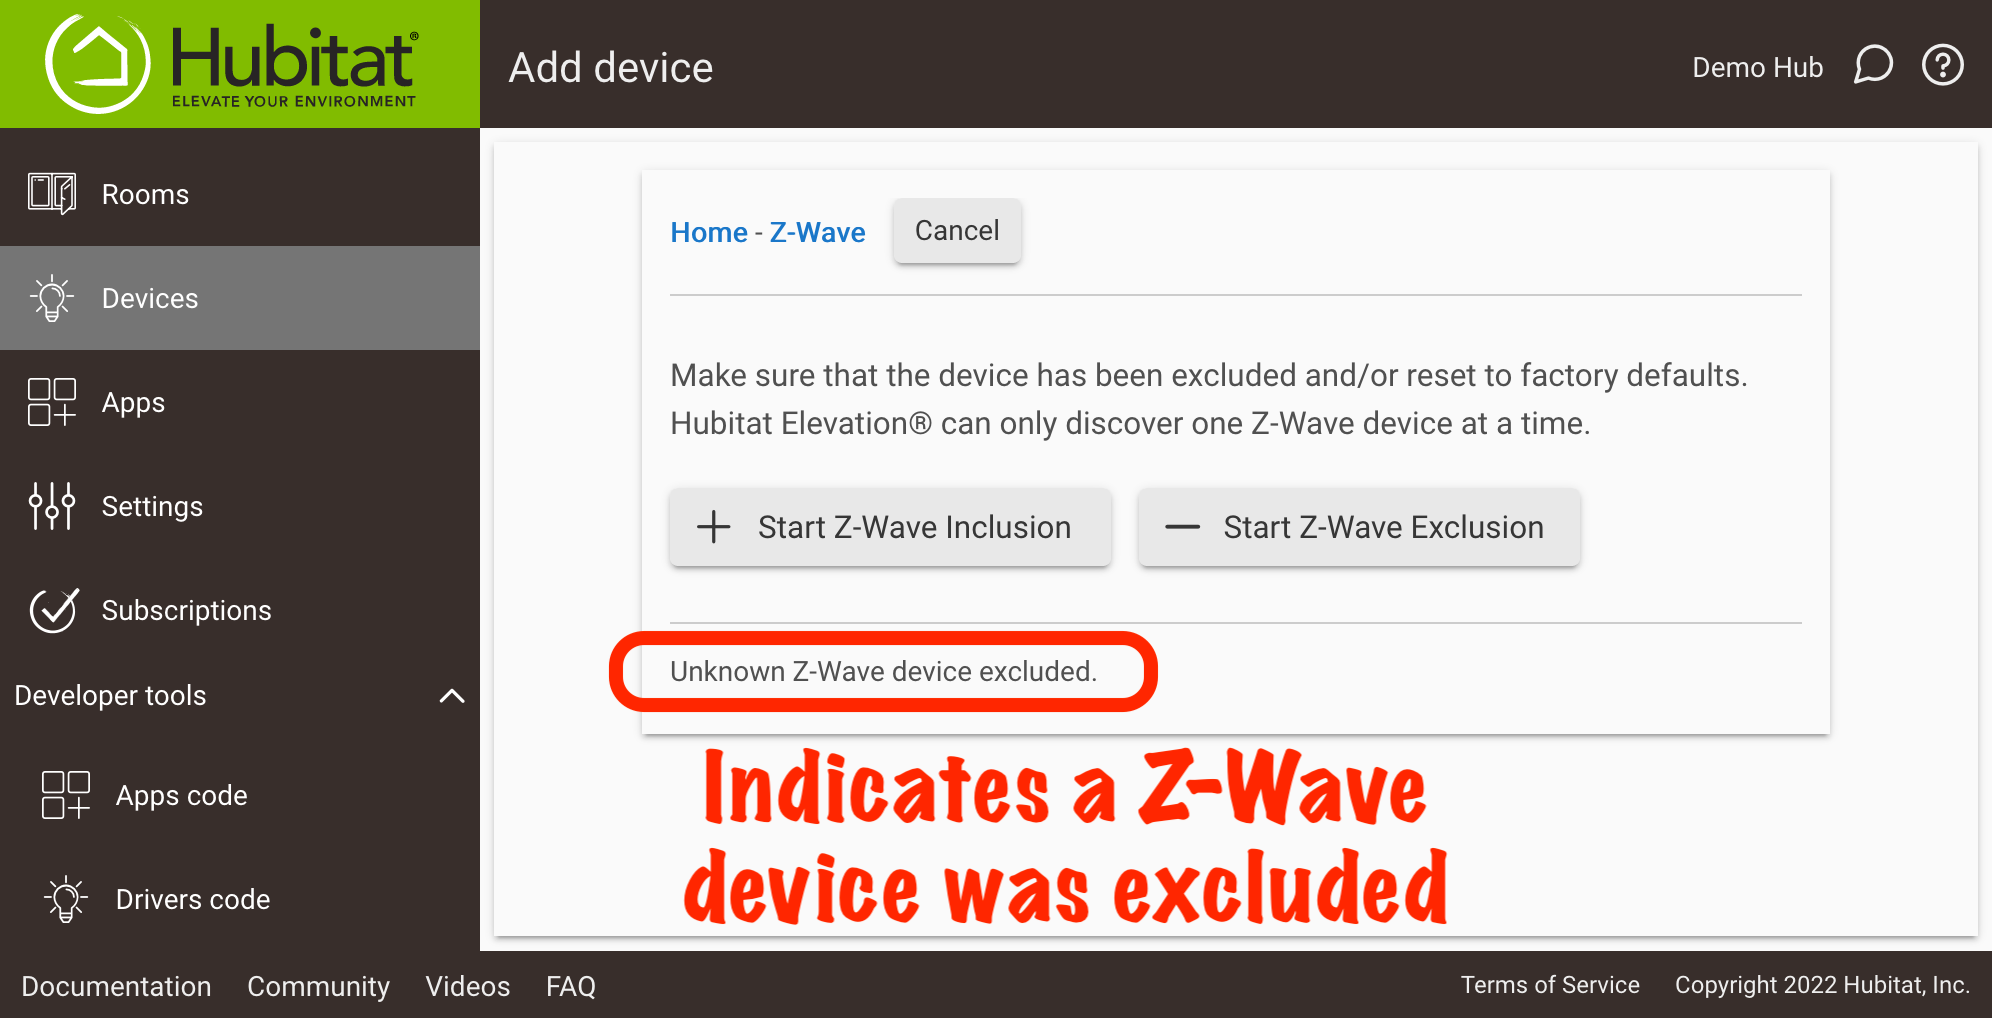 "Unknown Z-Wave device excluded" message in UI - screenshot